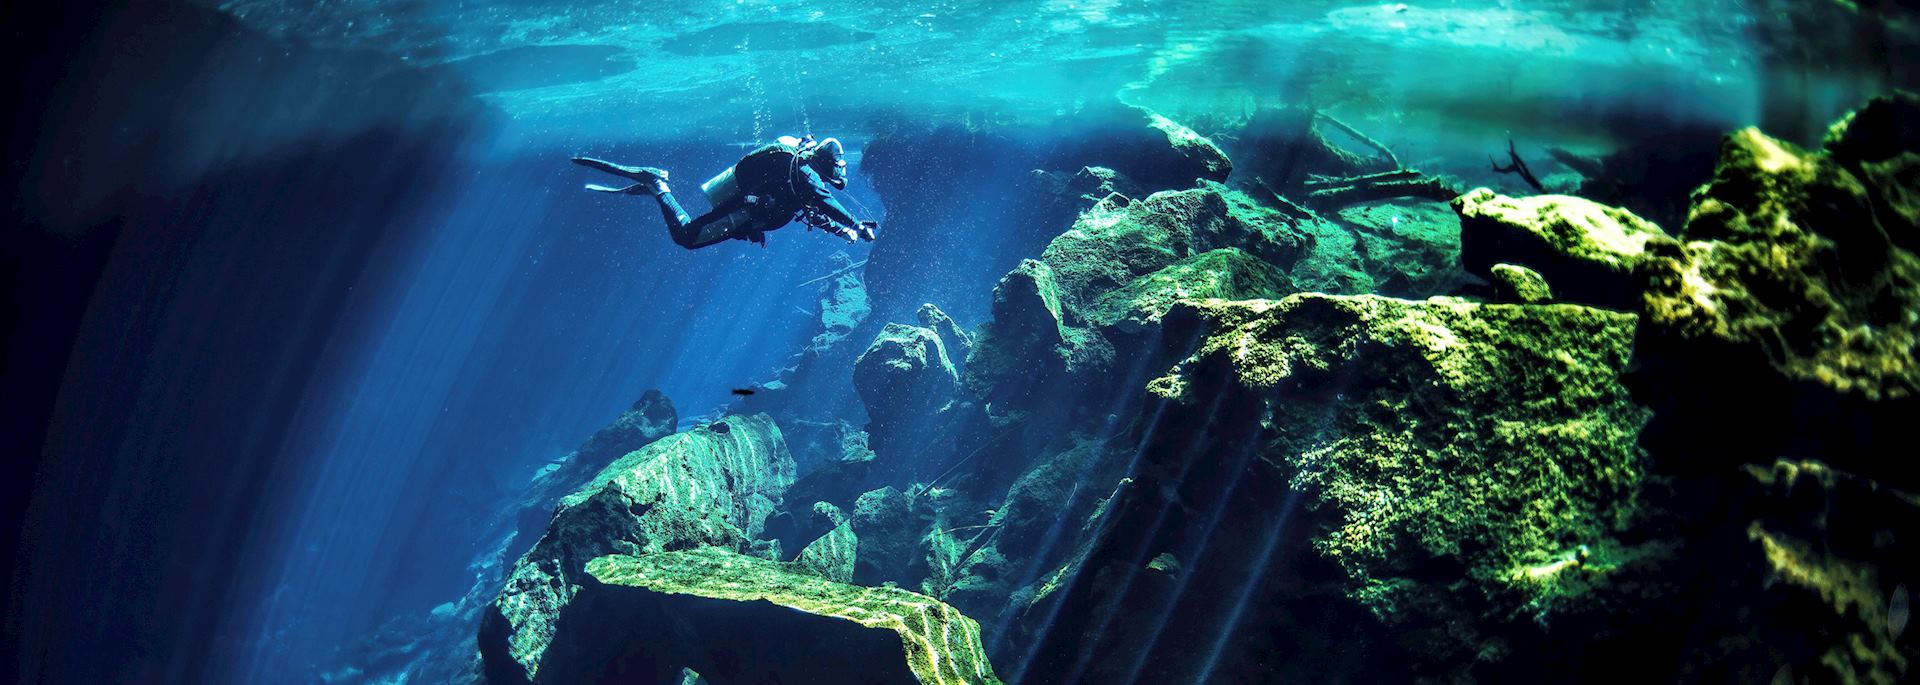 Diving in one of Mexico's cenotes